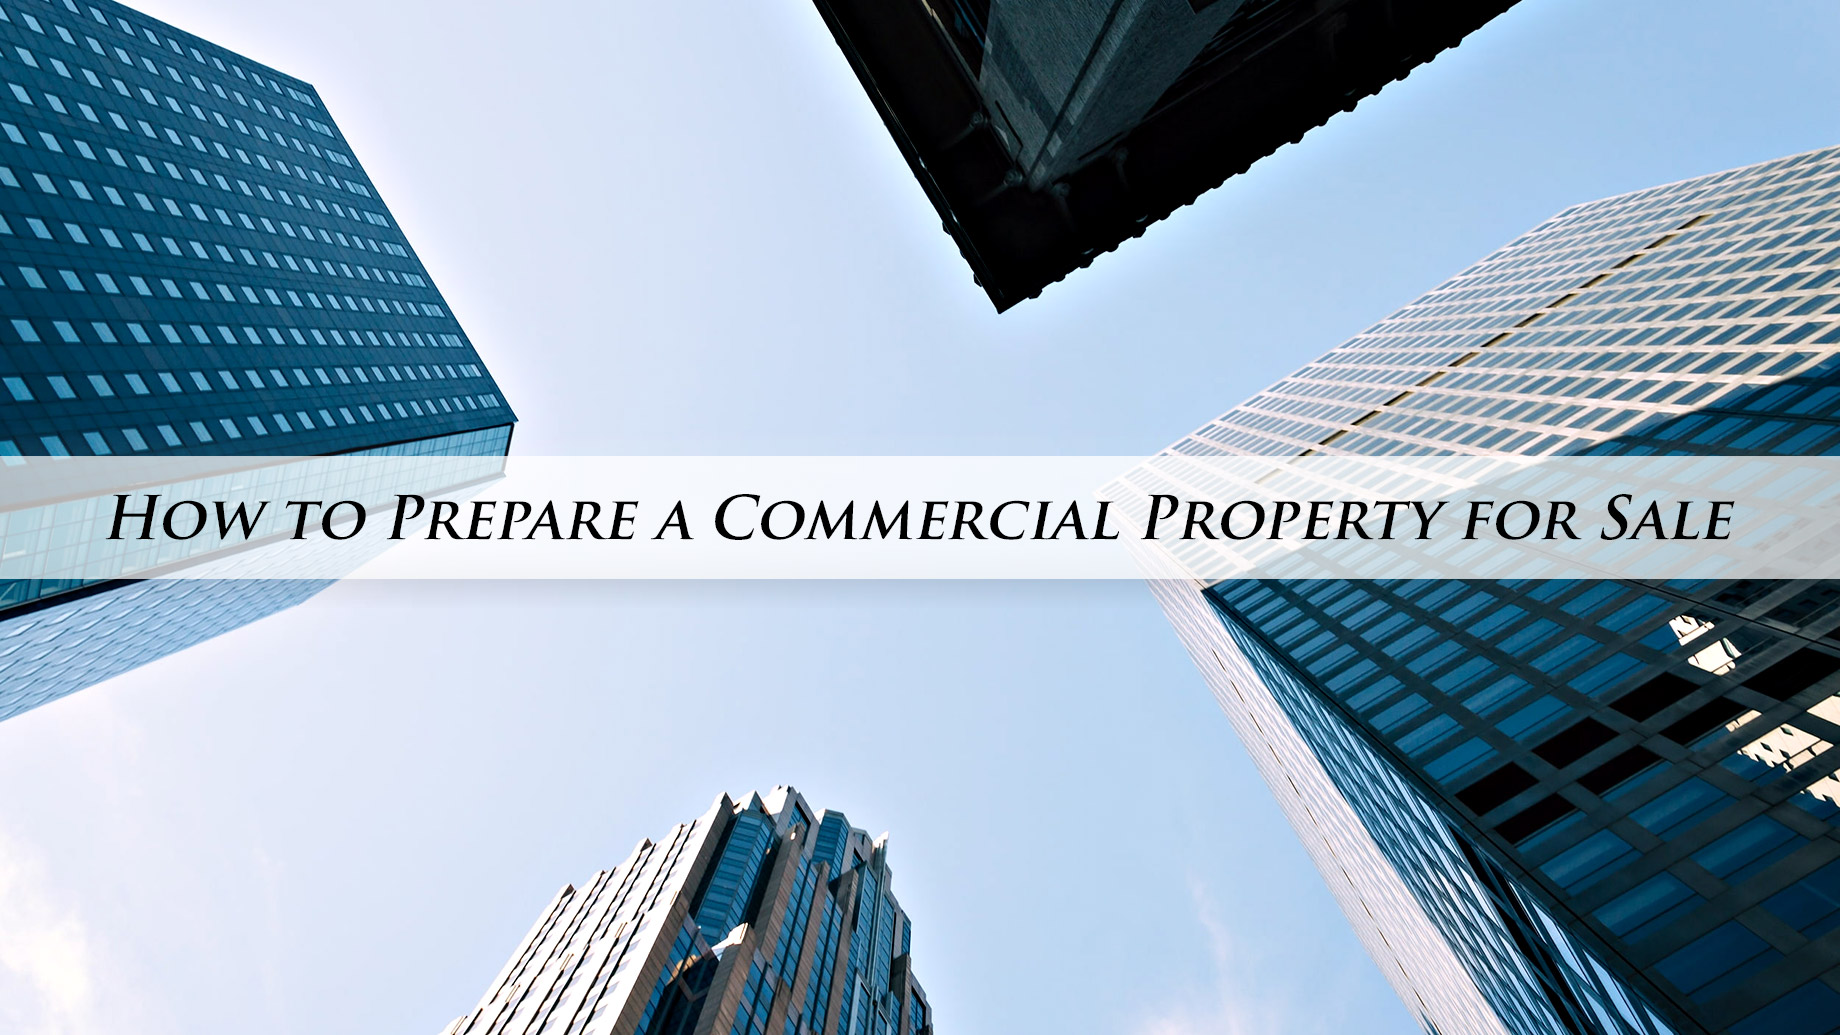 How to Prepare a Commercial Property for Sale